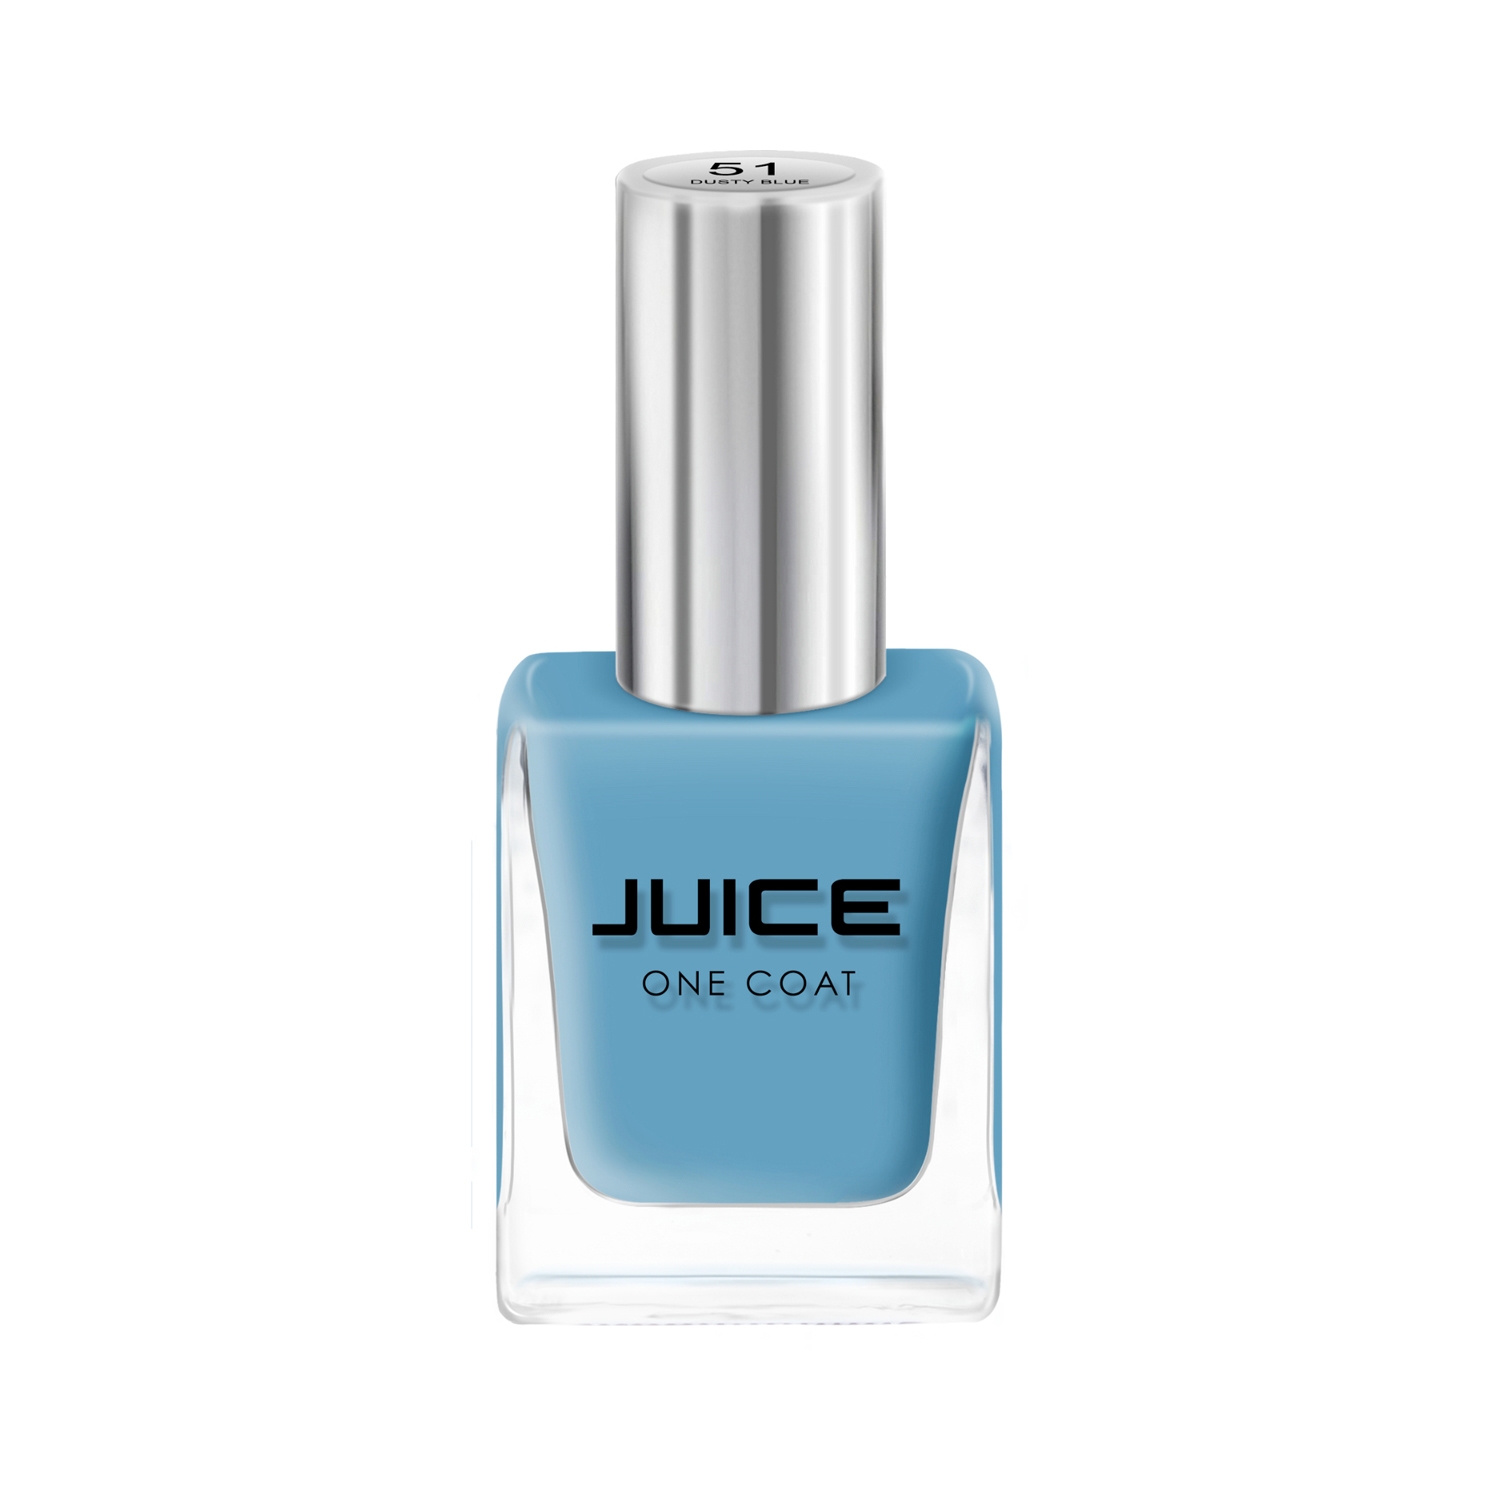 Juice One Coat Quick Dry Chip Resistant Nail Polish - 51 Dusty Blue (11ml)